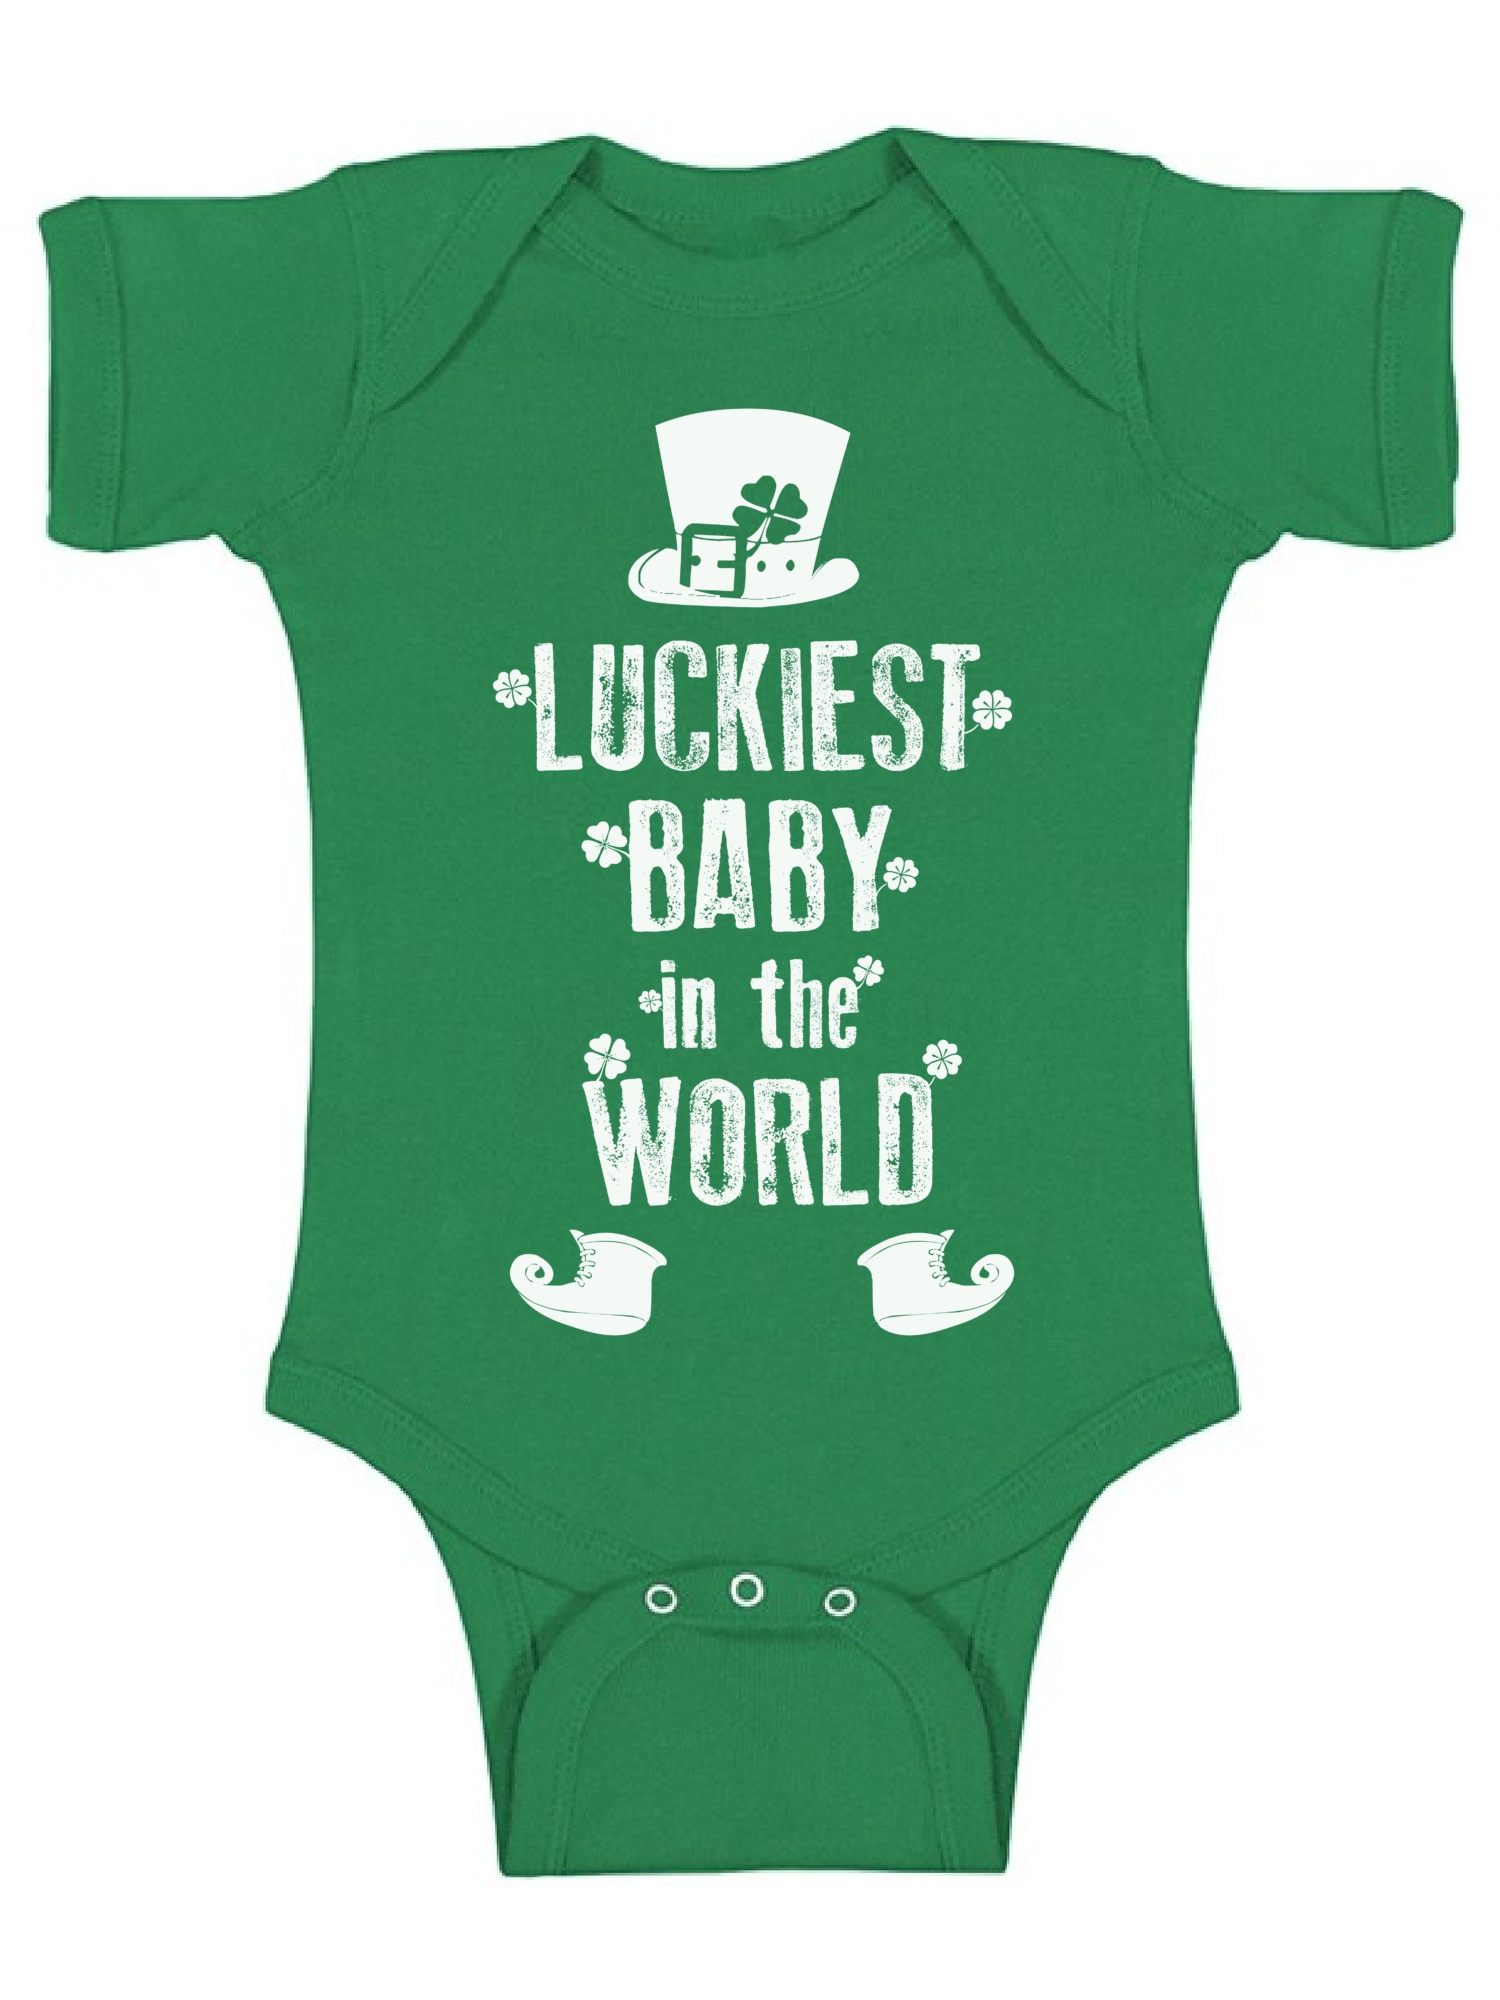 Awkward Styles Luckiest Baby In The World Short Sleeve Baby Bodysuit Irish Baby One Piece Top Irish Gifts for Baby St. Patrick's Day Bodysuit for Baby Boy Saint Patrick One Piece Top for Baby Girl - image 1 of 4